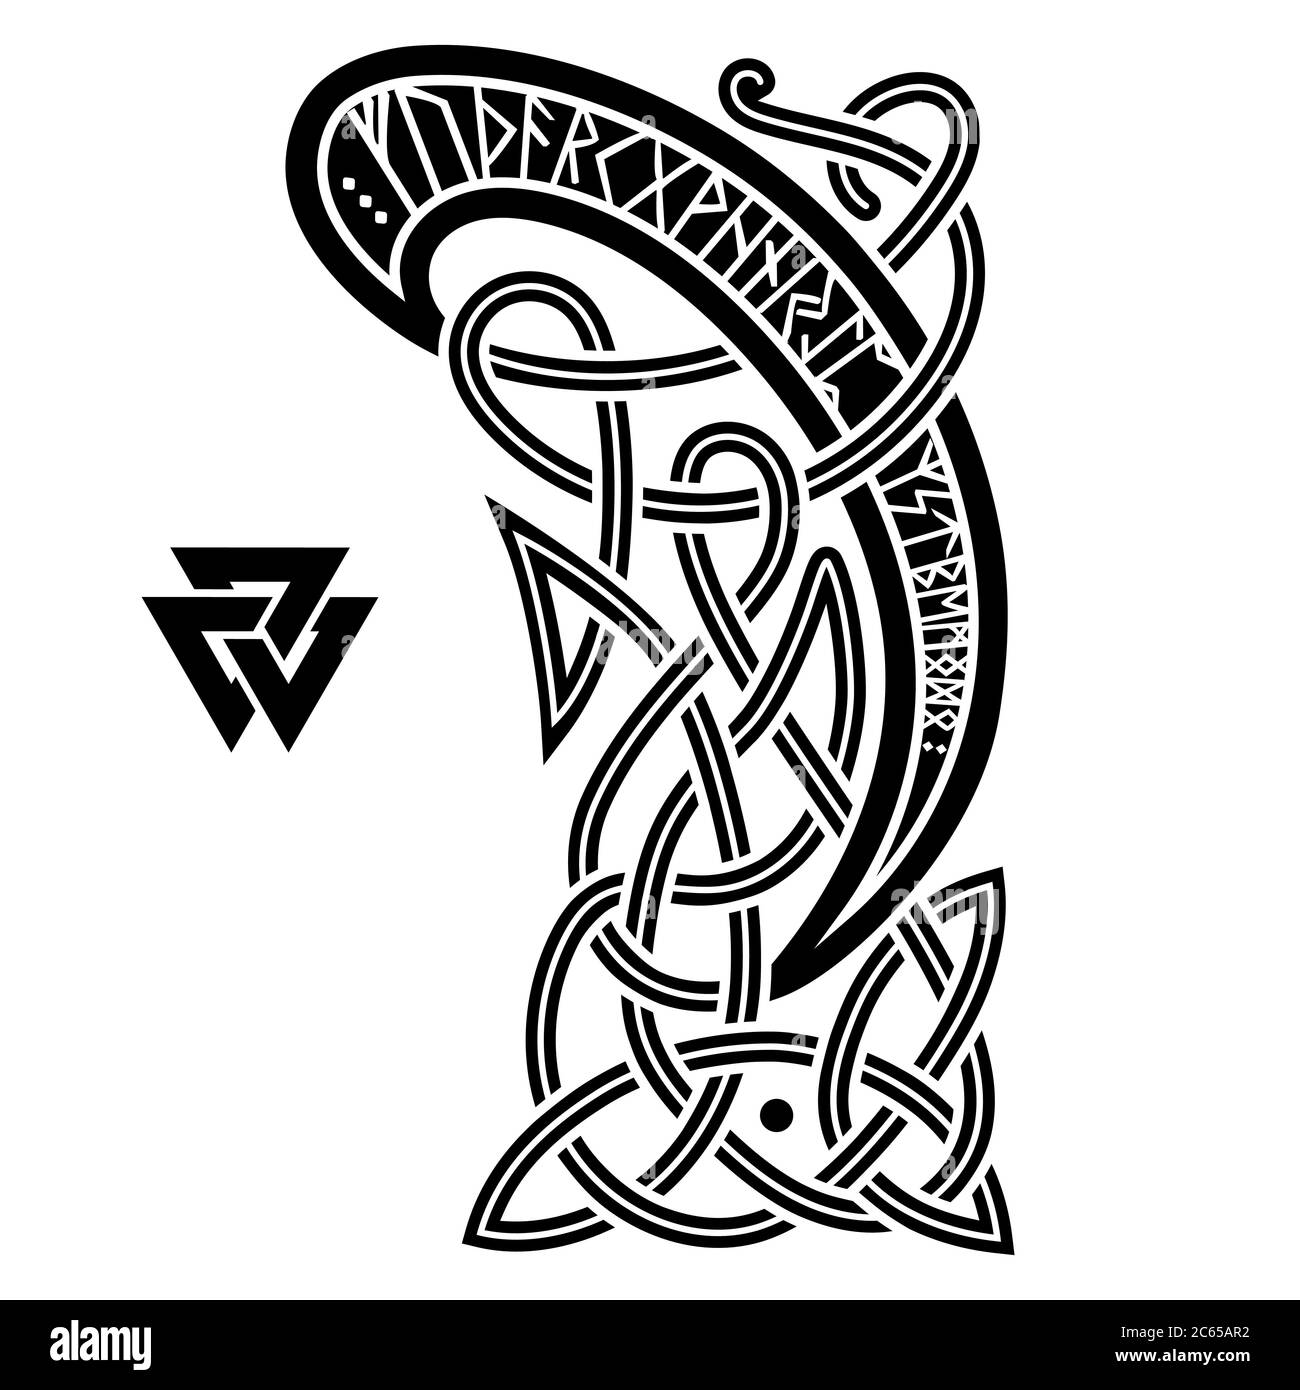 Ancient decorative dragon in celtic style, scandinavian knot-work illustration Stock Vector